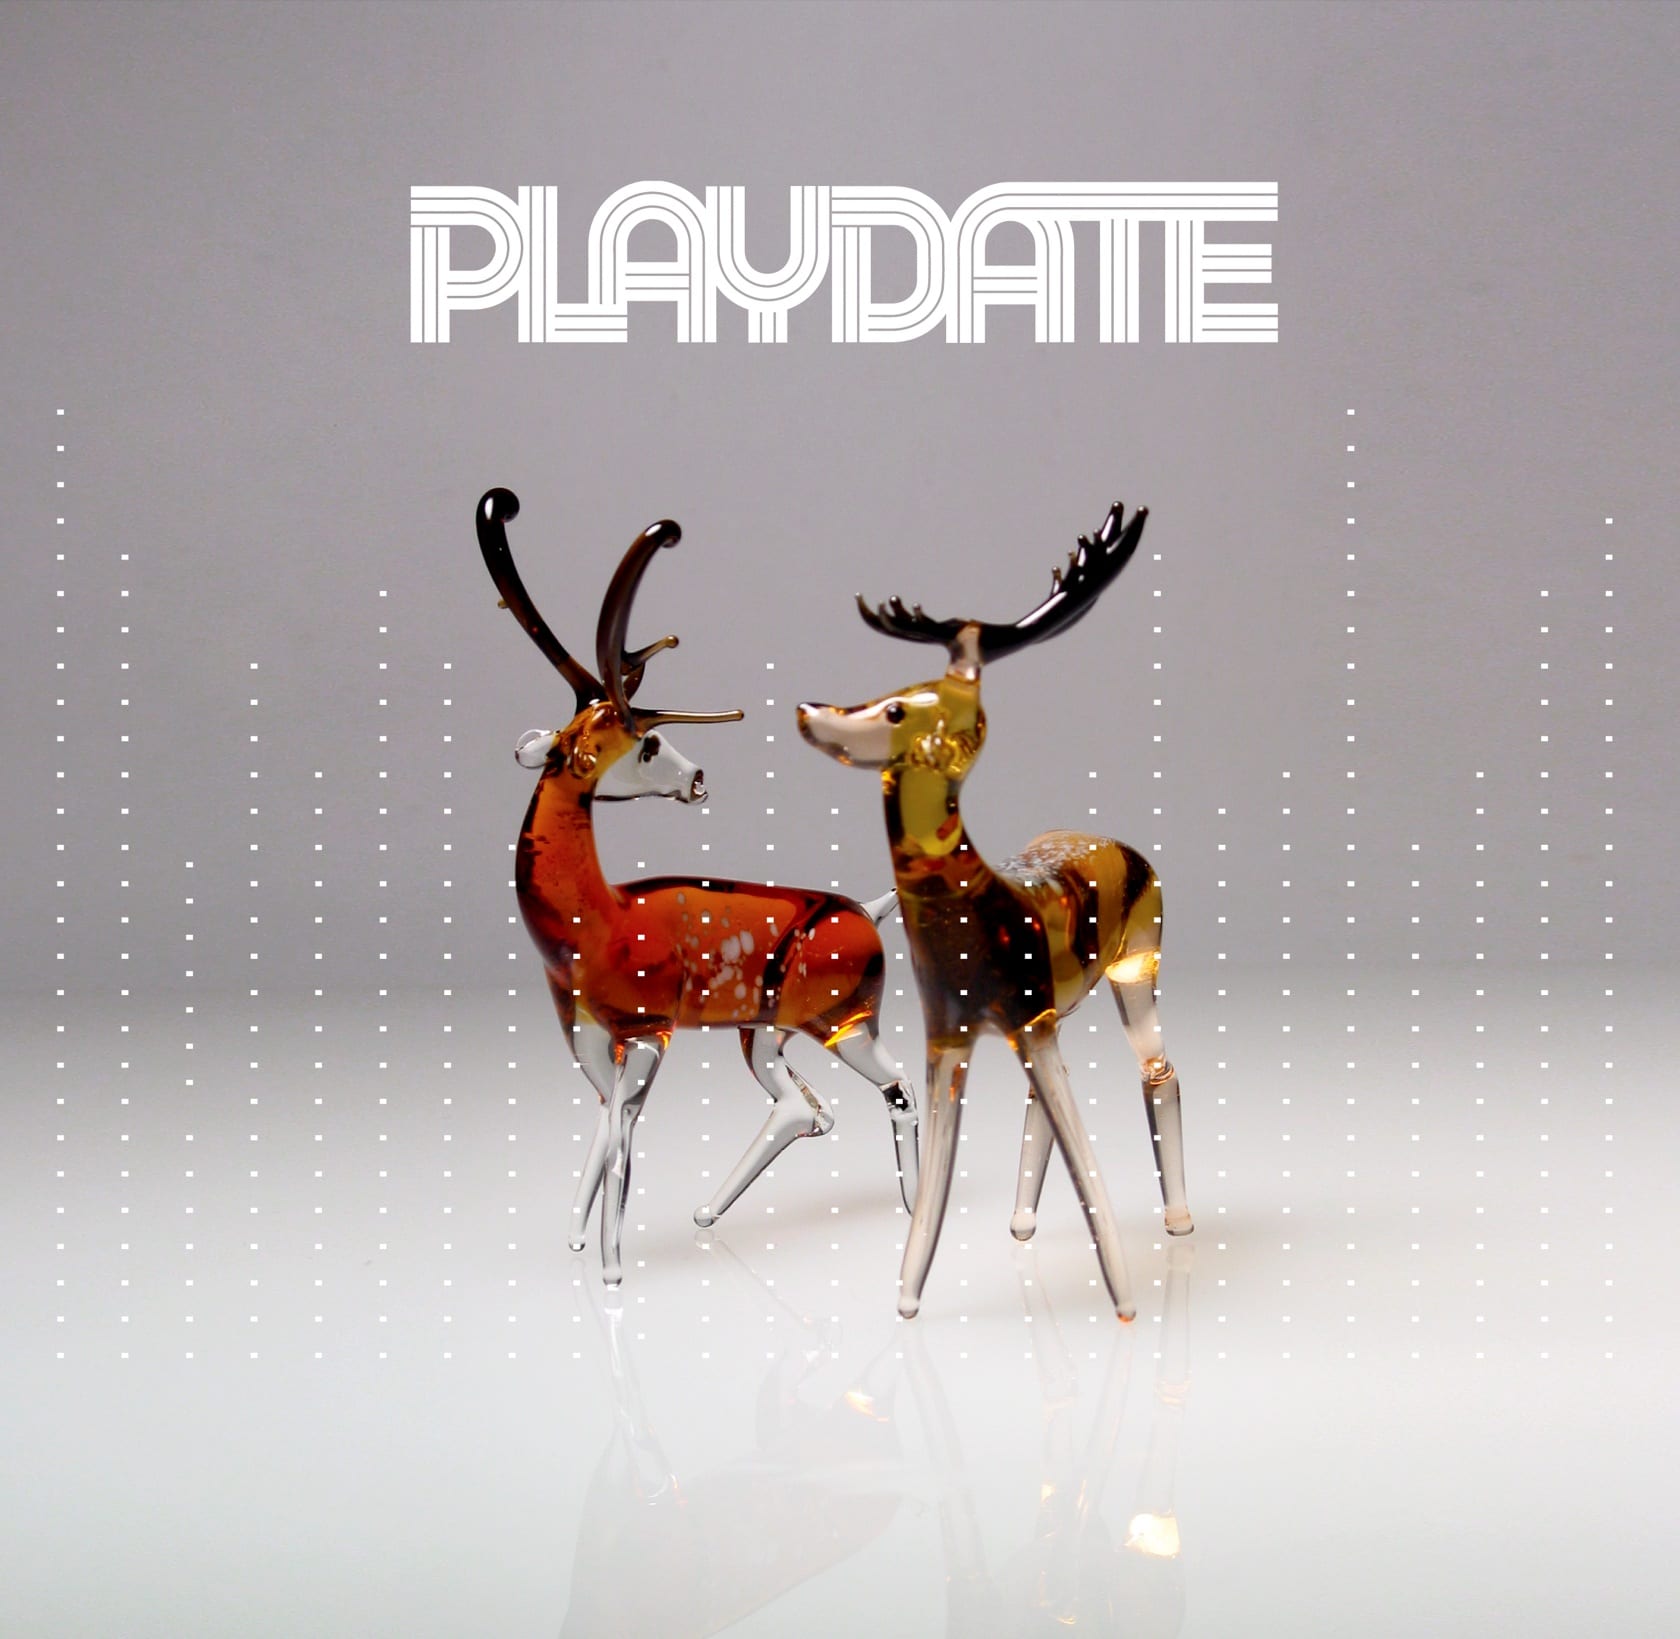 PLAYDATE CD FRONT